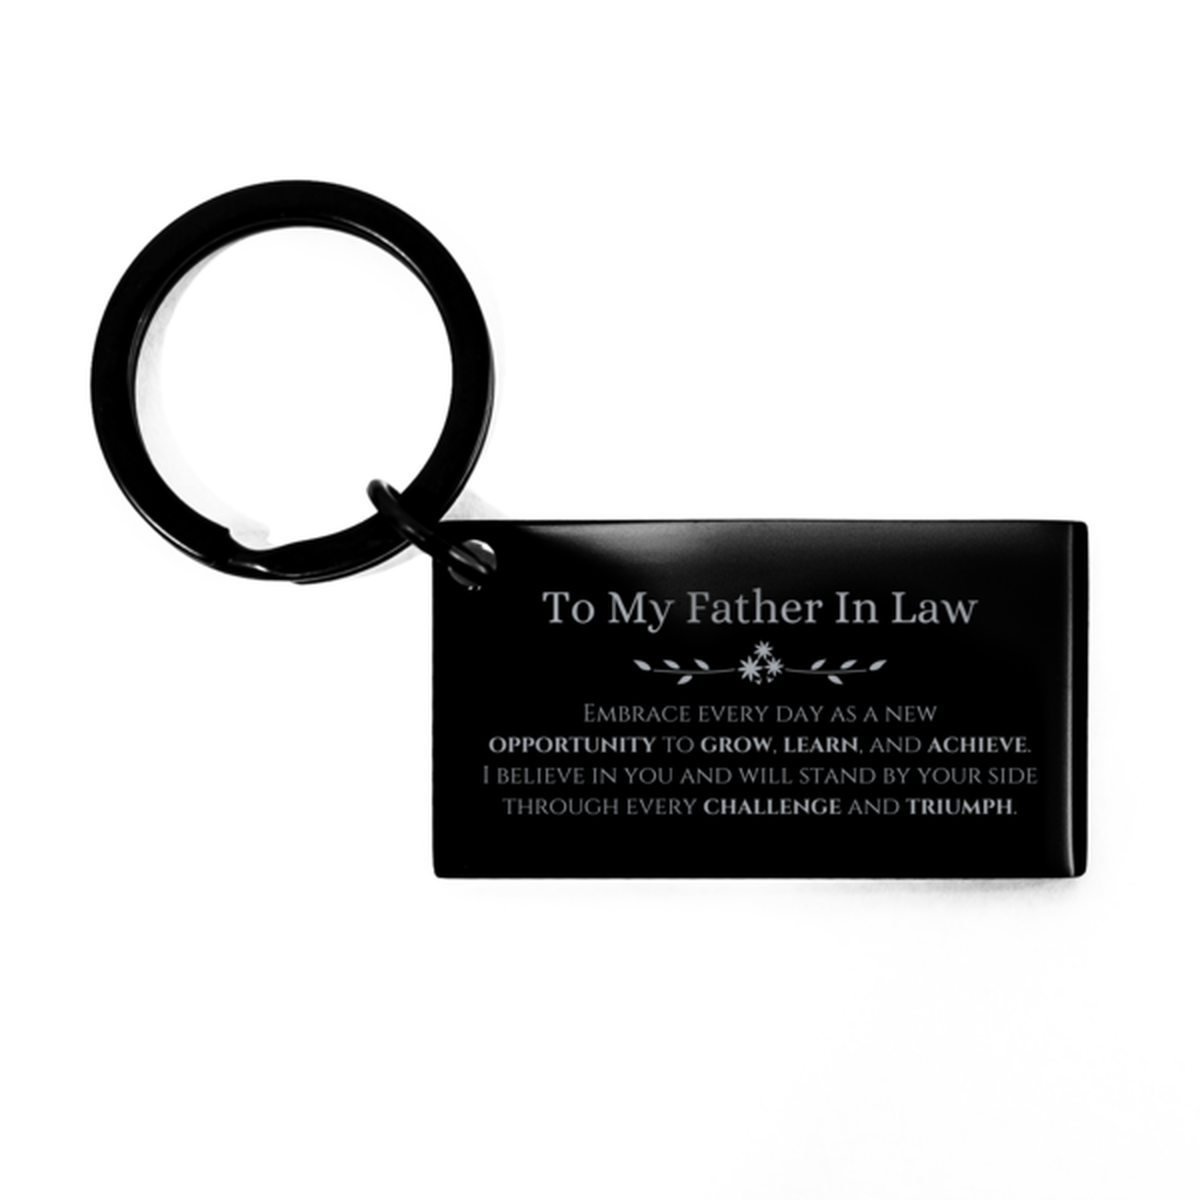 To My Father In Law Gifts, I believe in you and will stand by your side, Inspirational Keychain For Father In Law, Birthday Christmas Motivational Father In Law Gifts